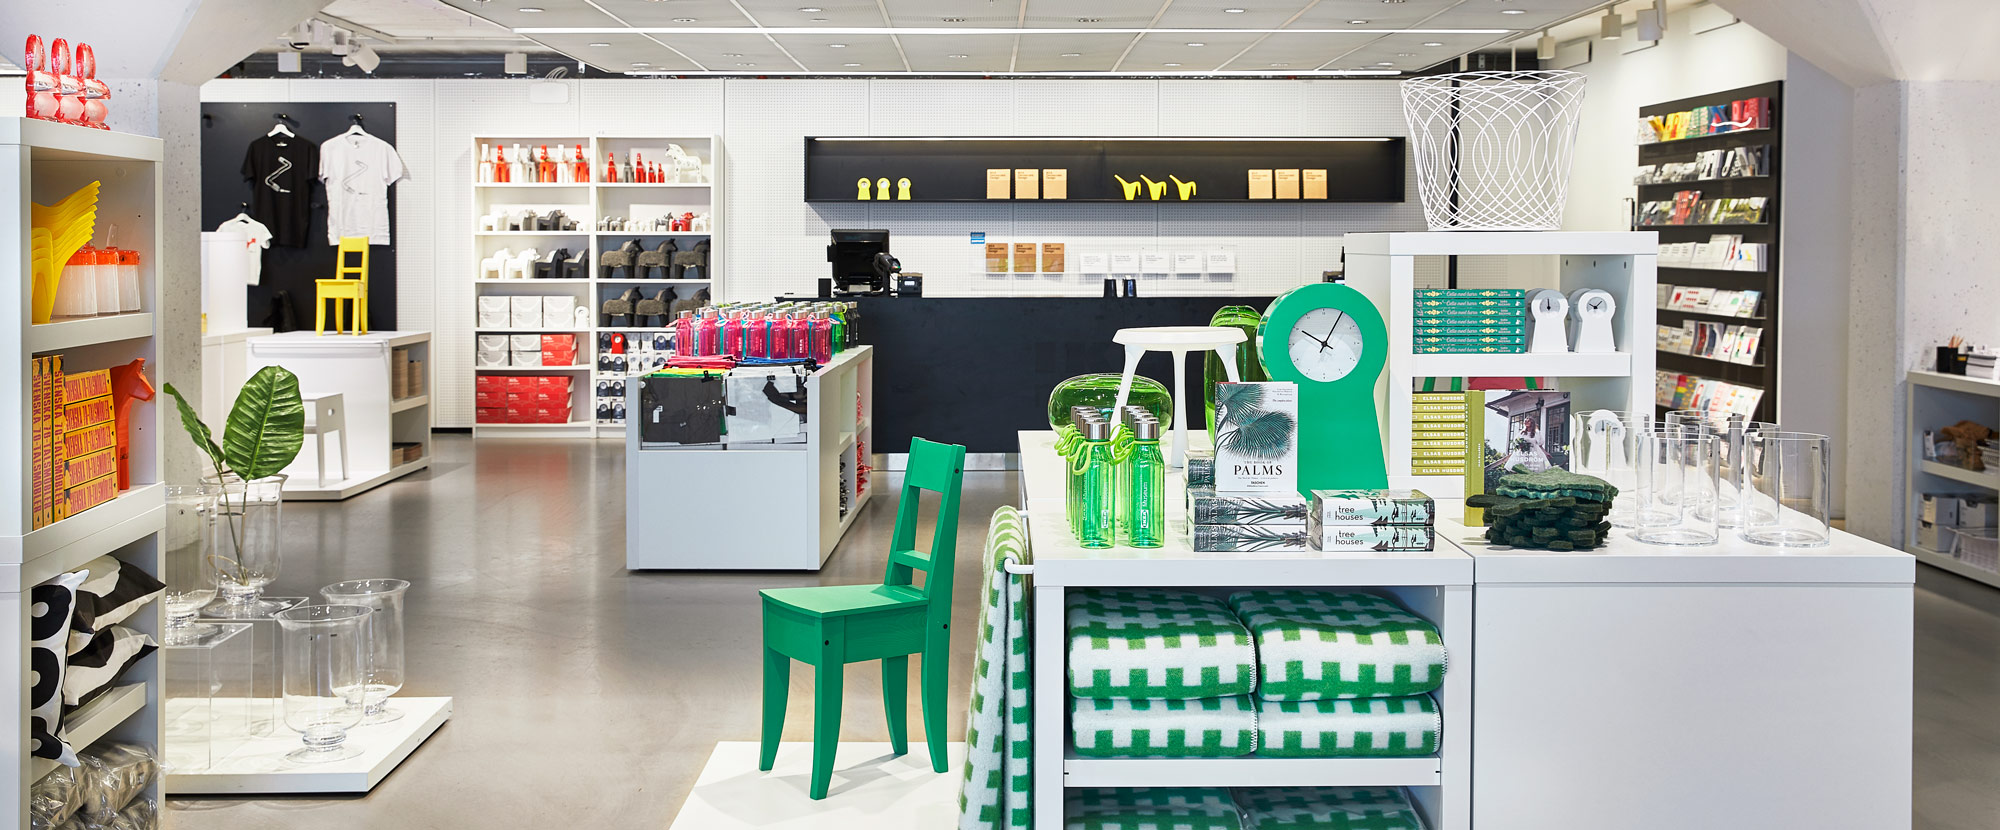 Overview of bright, colourful interior of IKEA Museum shop floor.